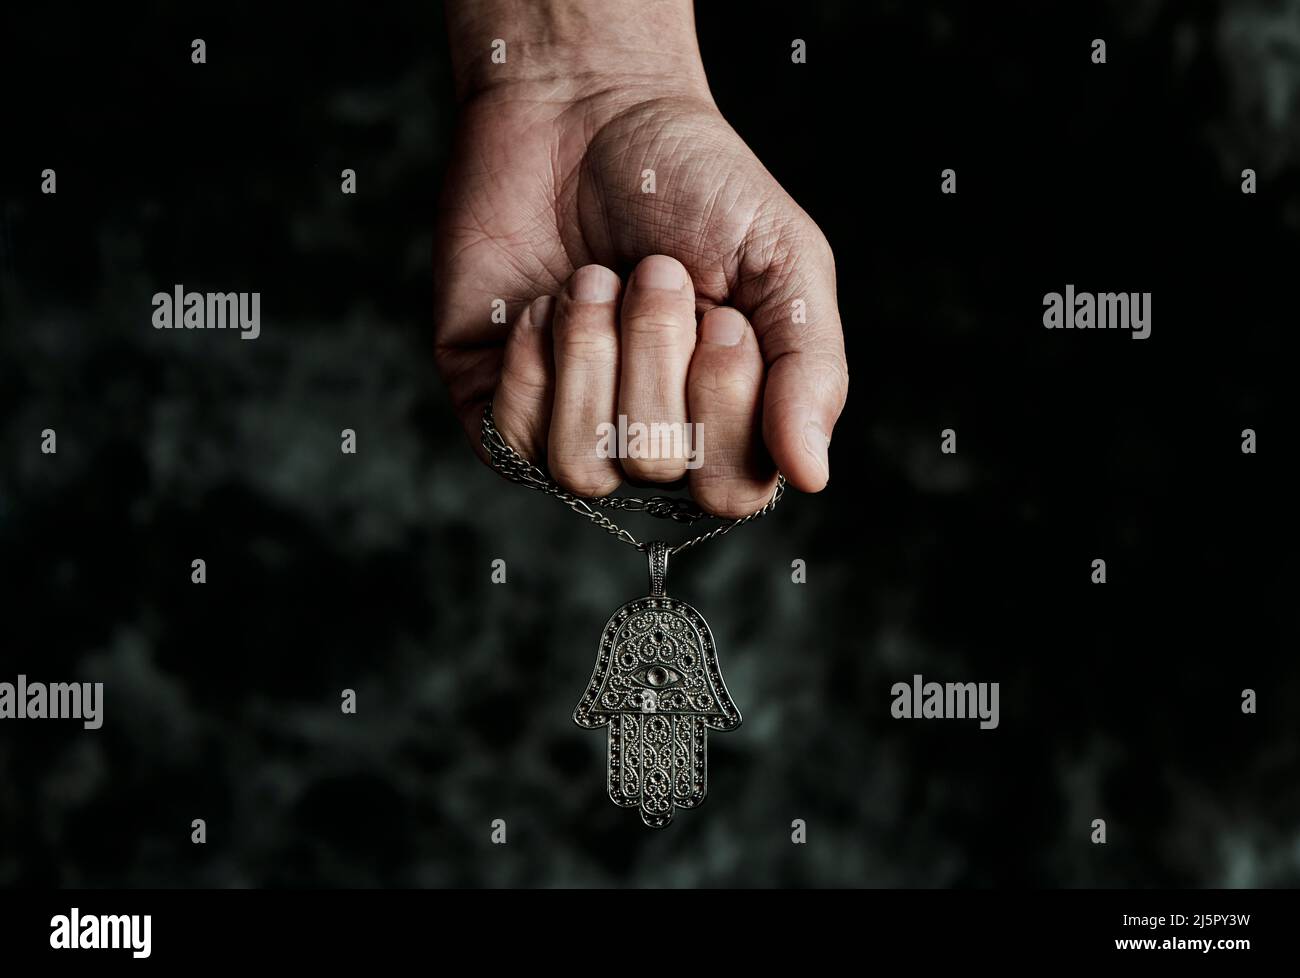 a man is holding an old hamsa amulet, also known of the hand of fatima or the hand of mary, on a black mottled background Stock Photo